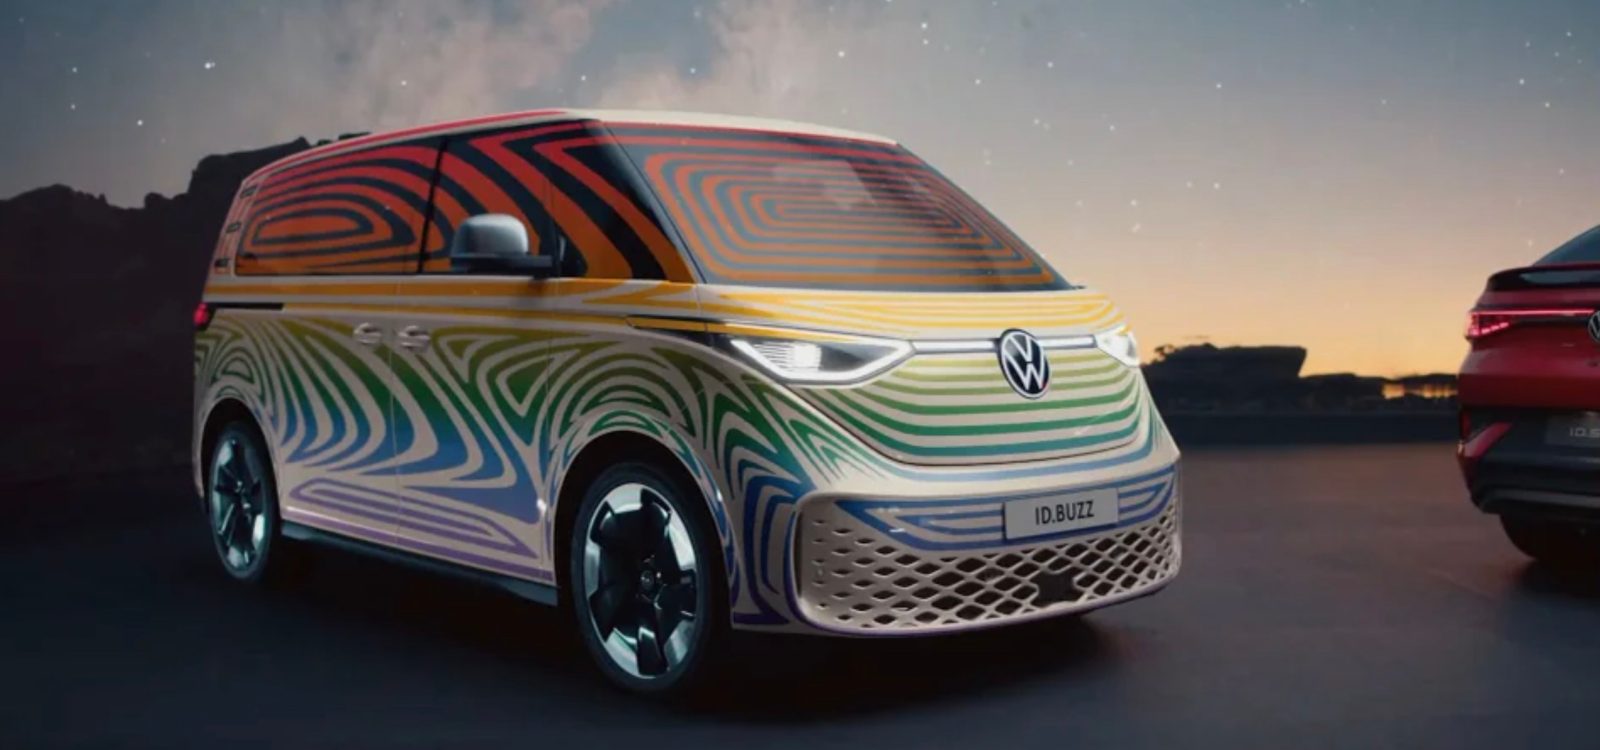 2020 Volkswagen Transporter (T6.1) is the Bus we won't see